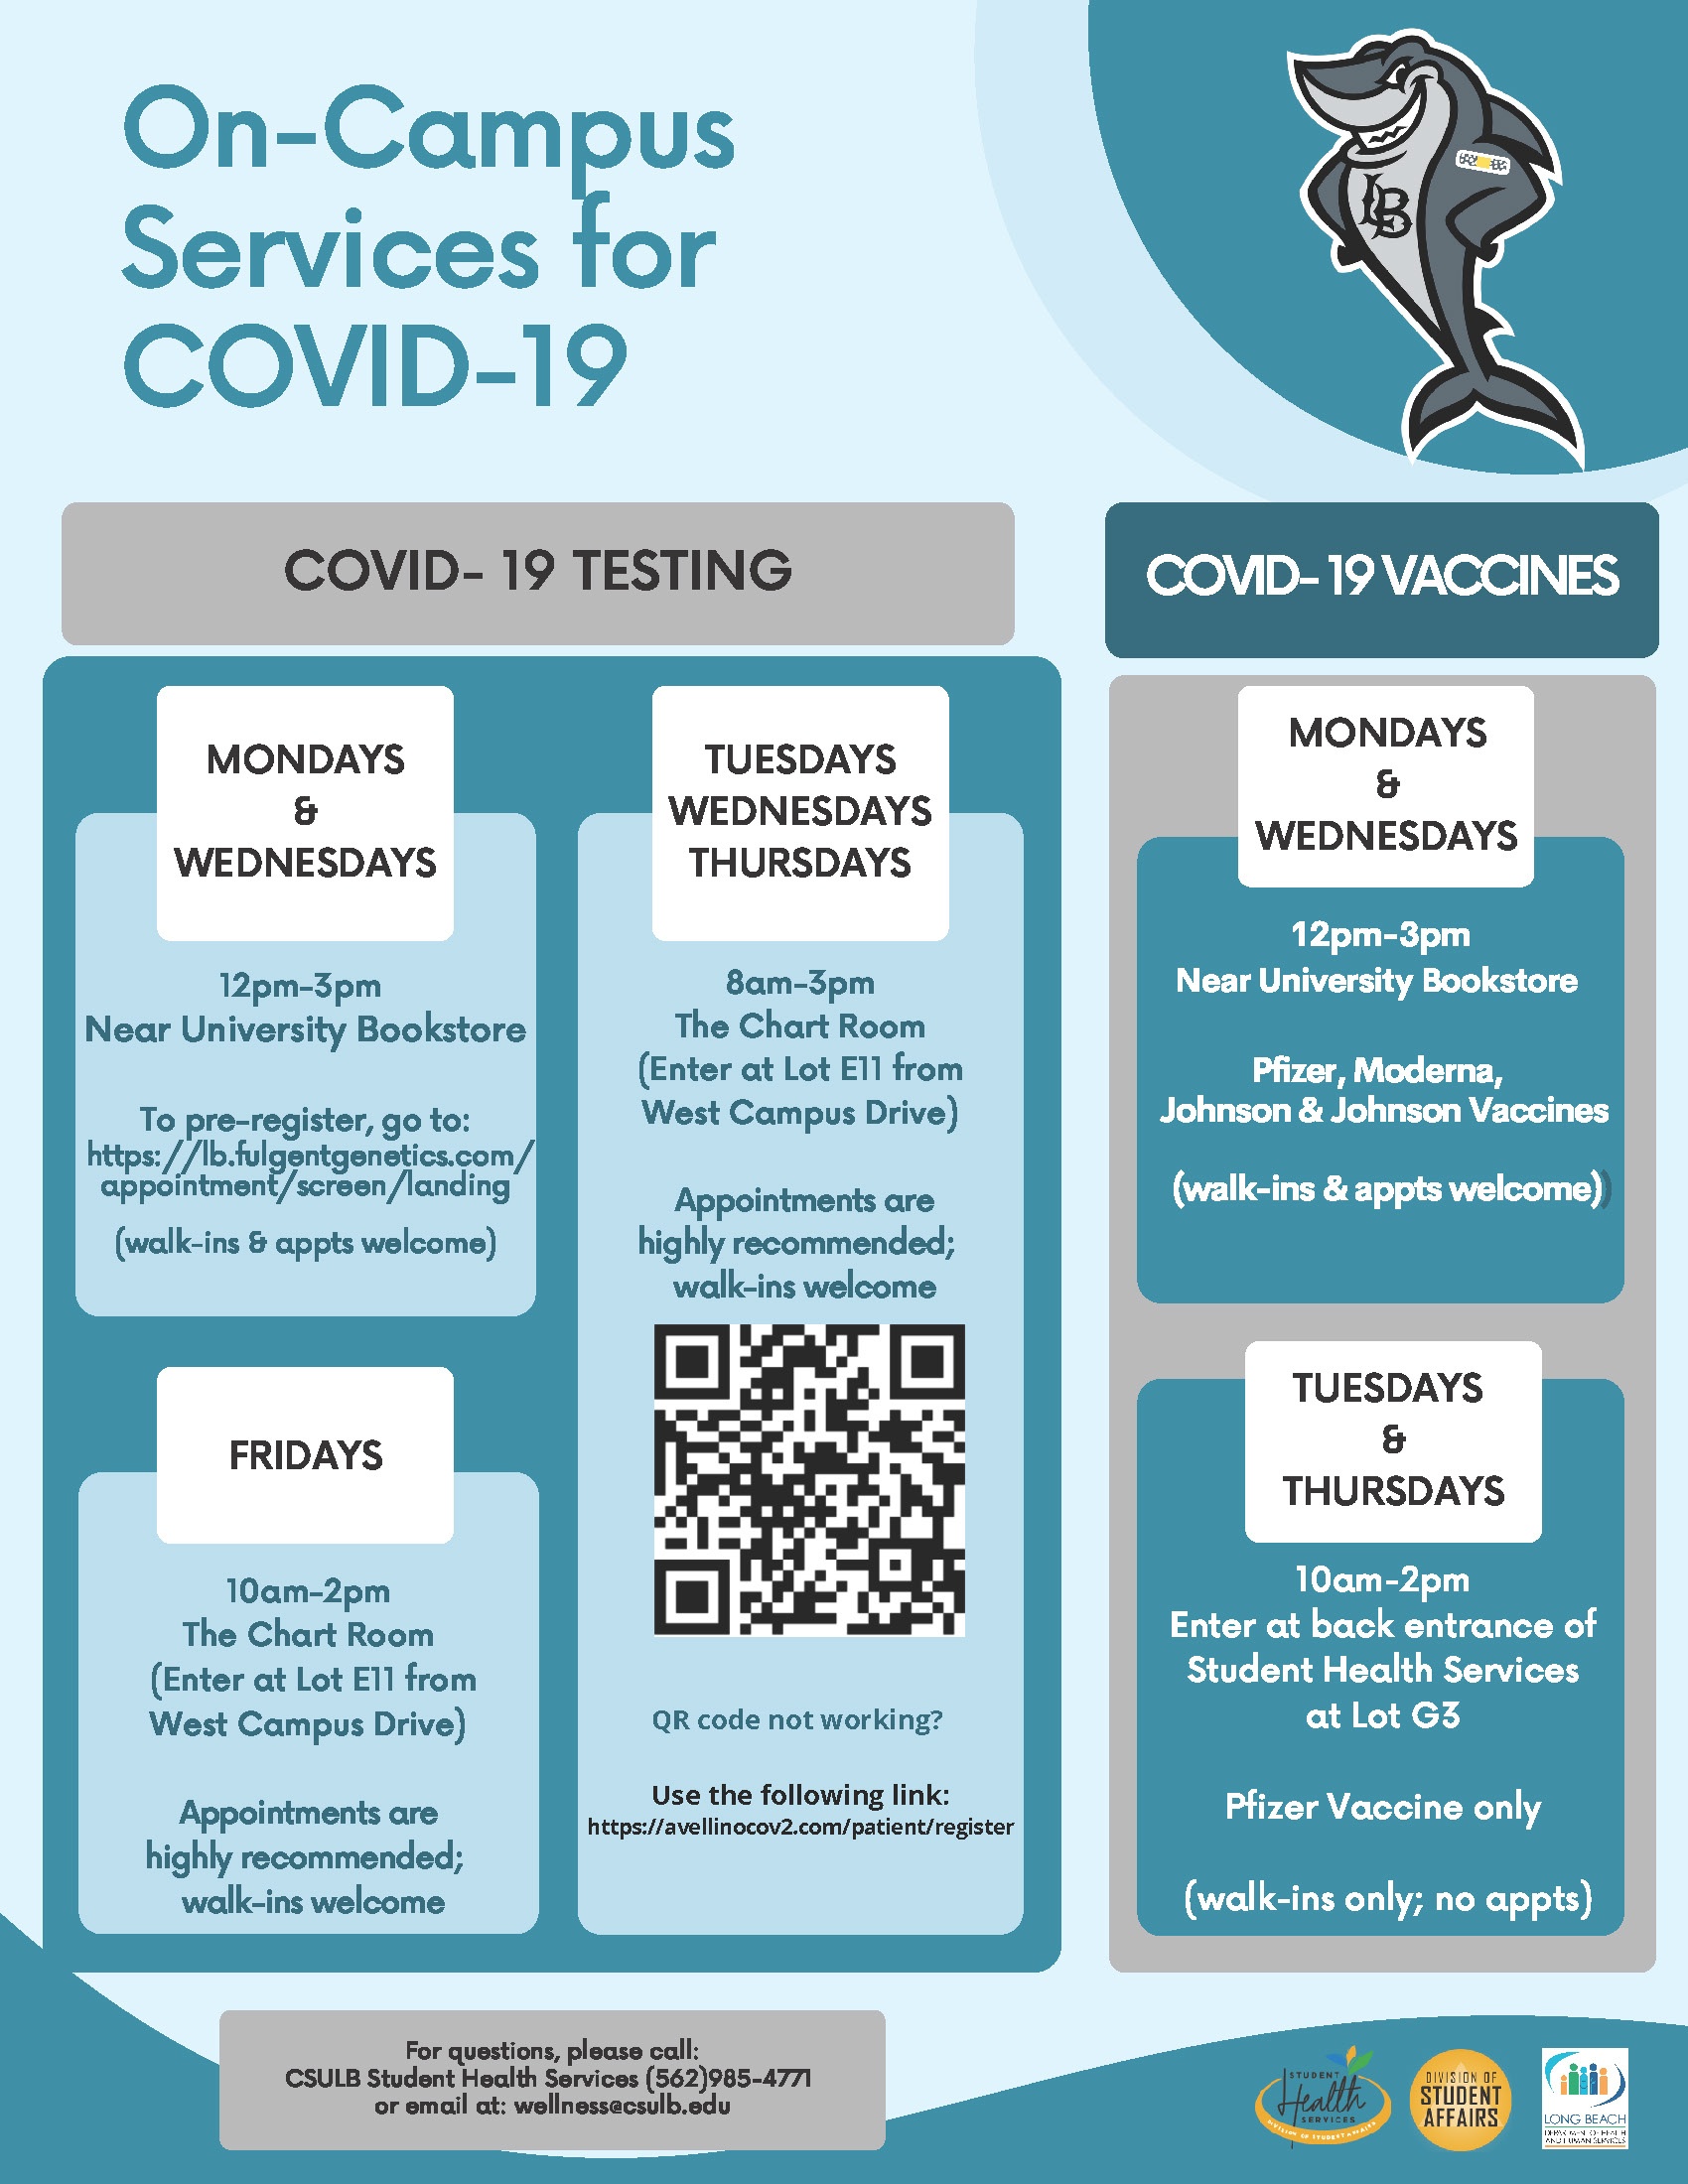 On-Campus Resources for COVID-19